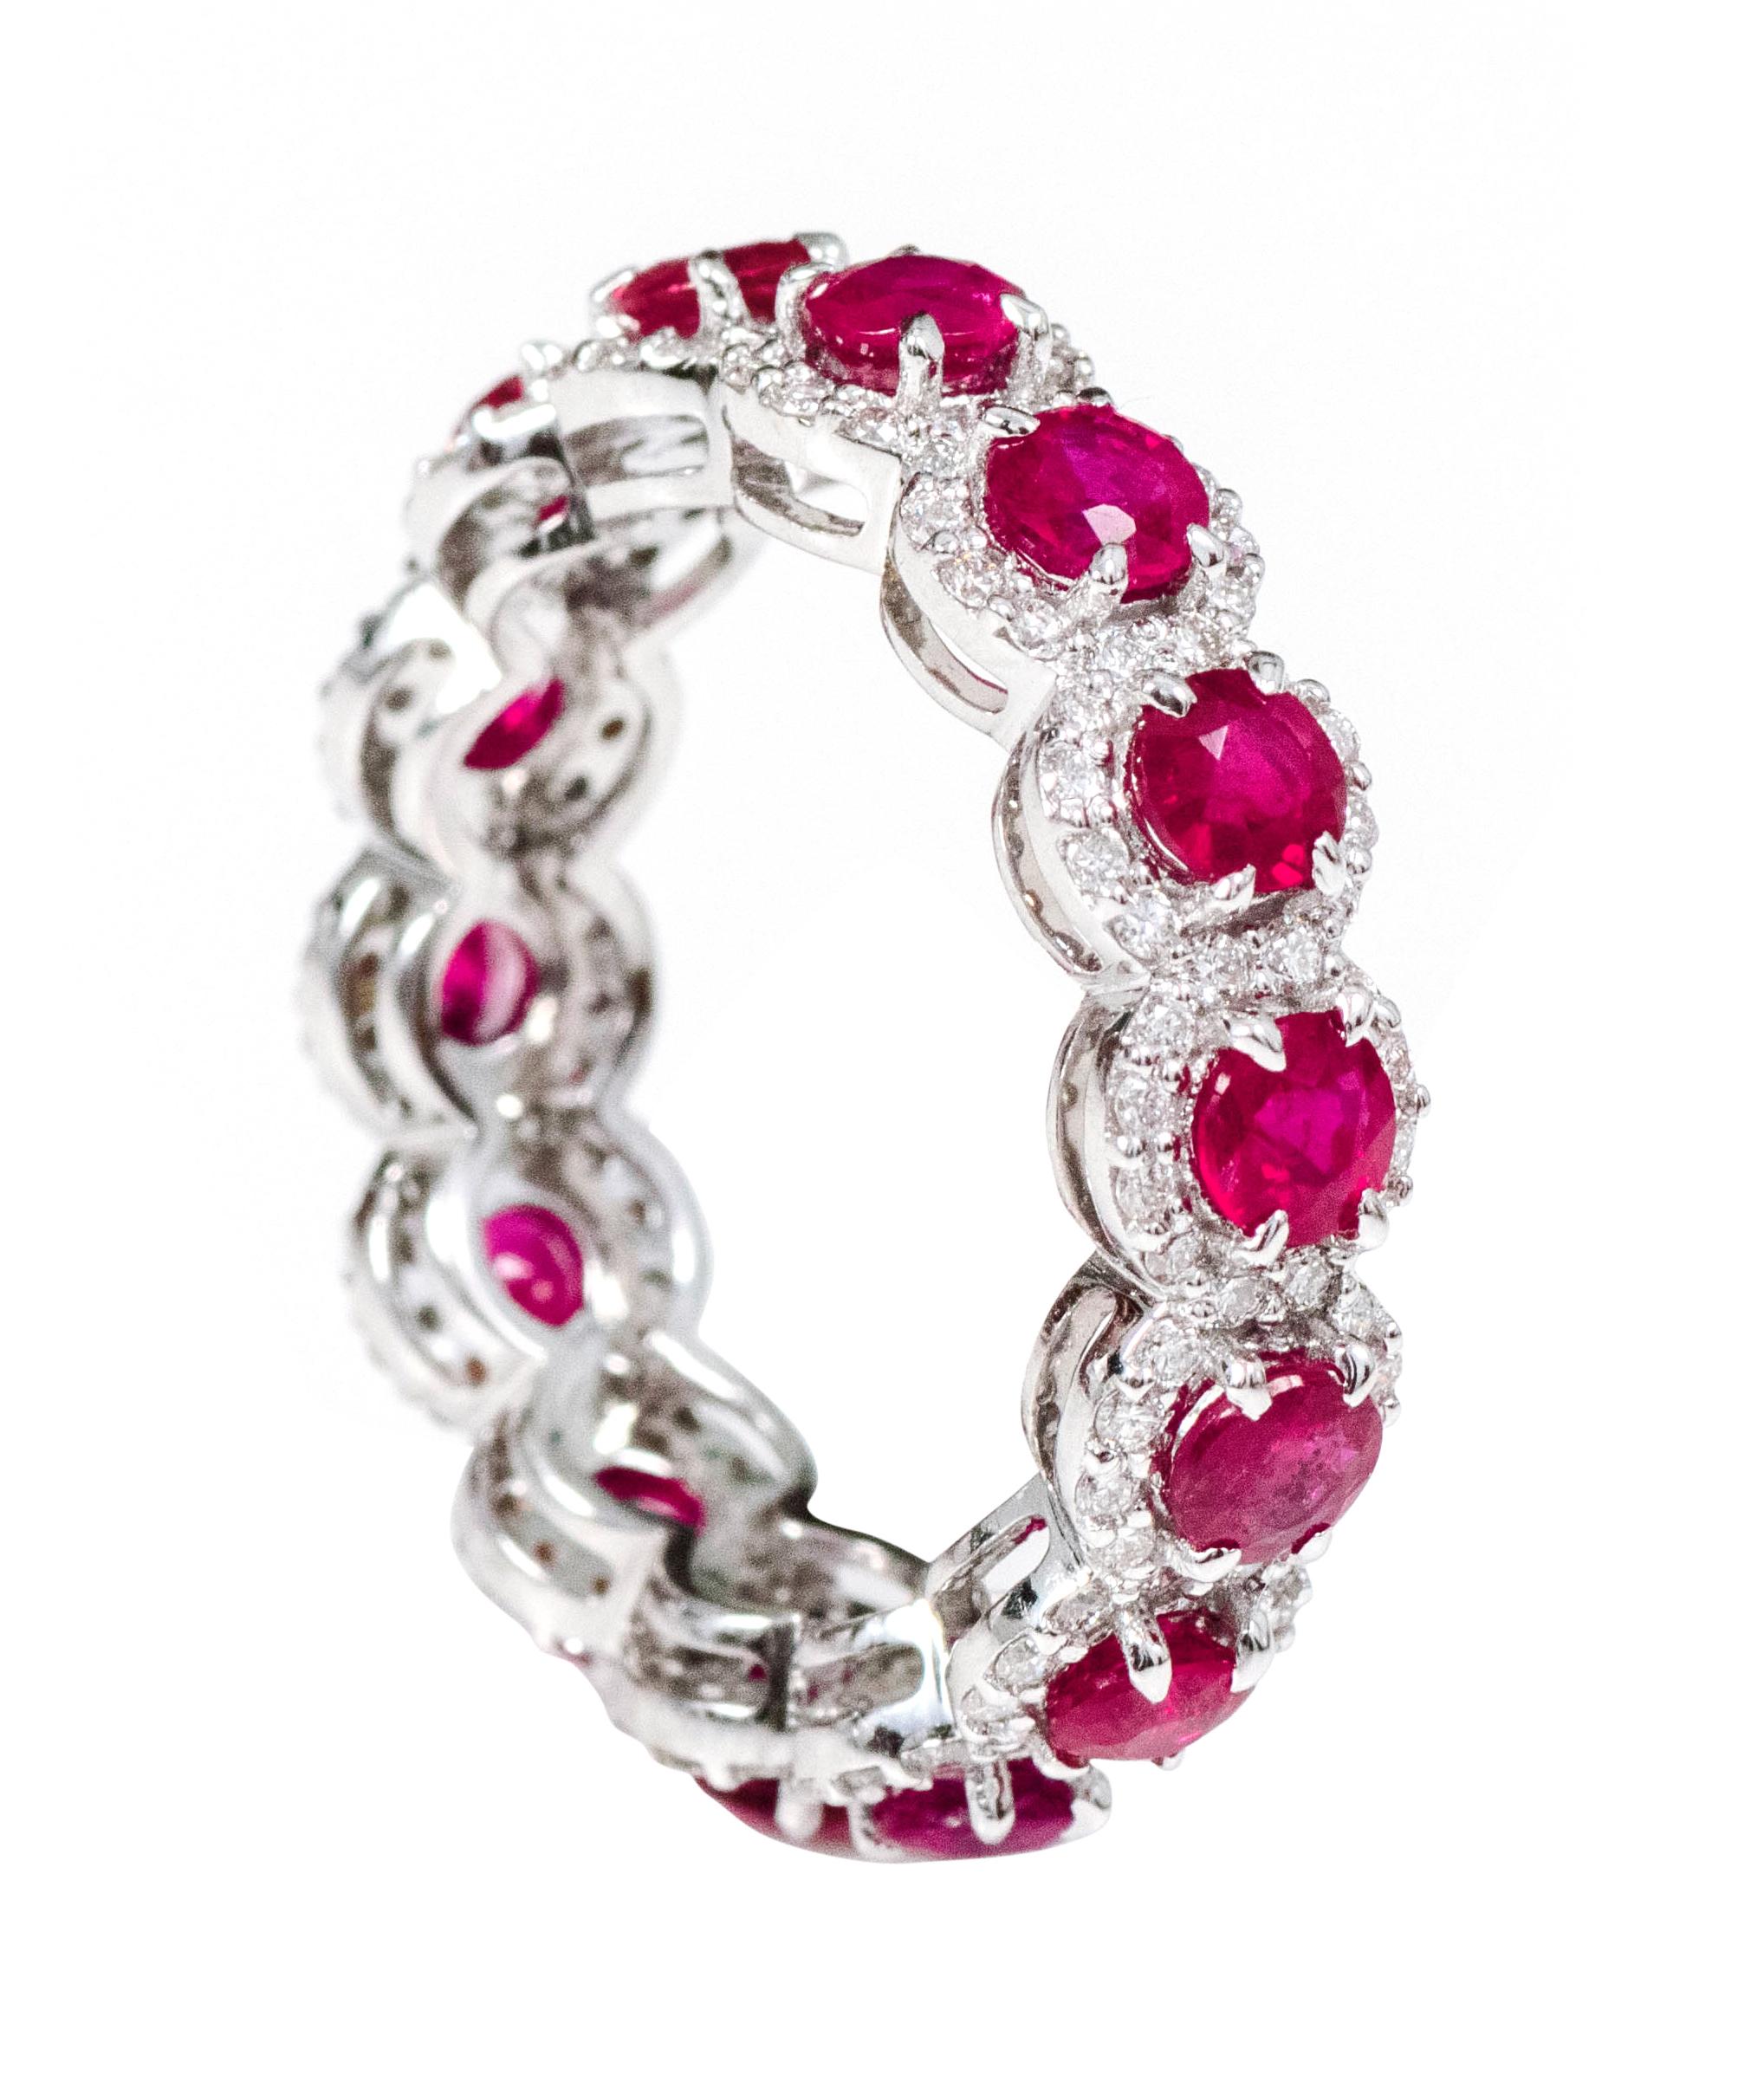 Brilliant Cut 18 Karat White Gold 3.39 Carat Ruby and Diamond Cluster Eternity Band Ring For Sale